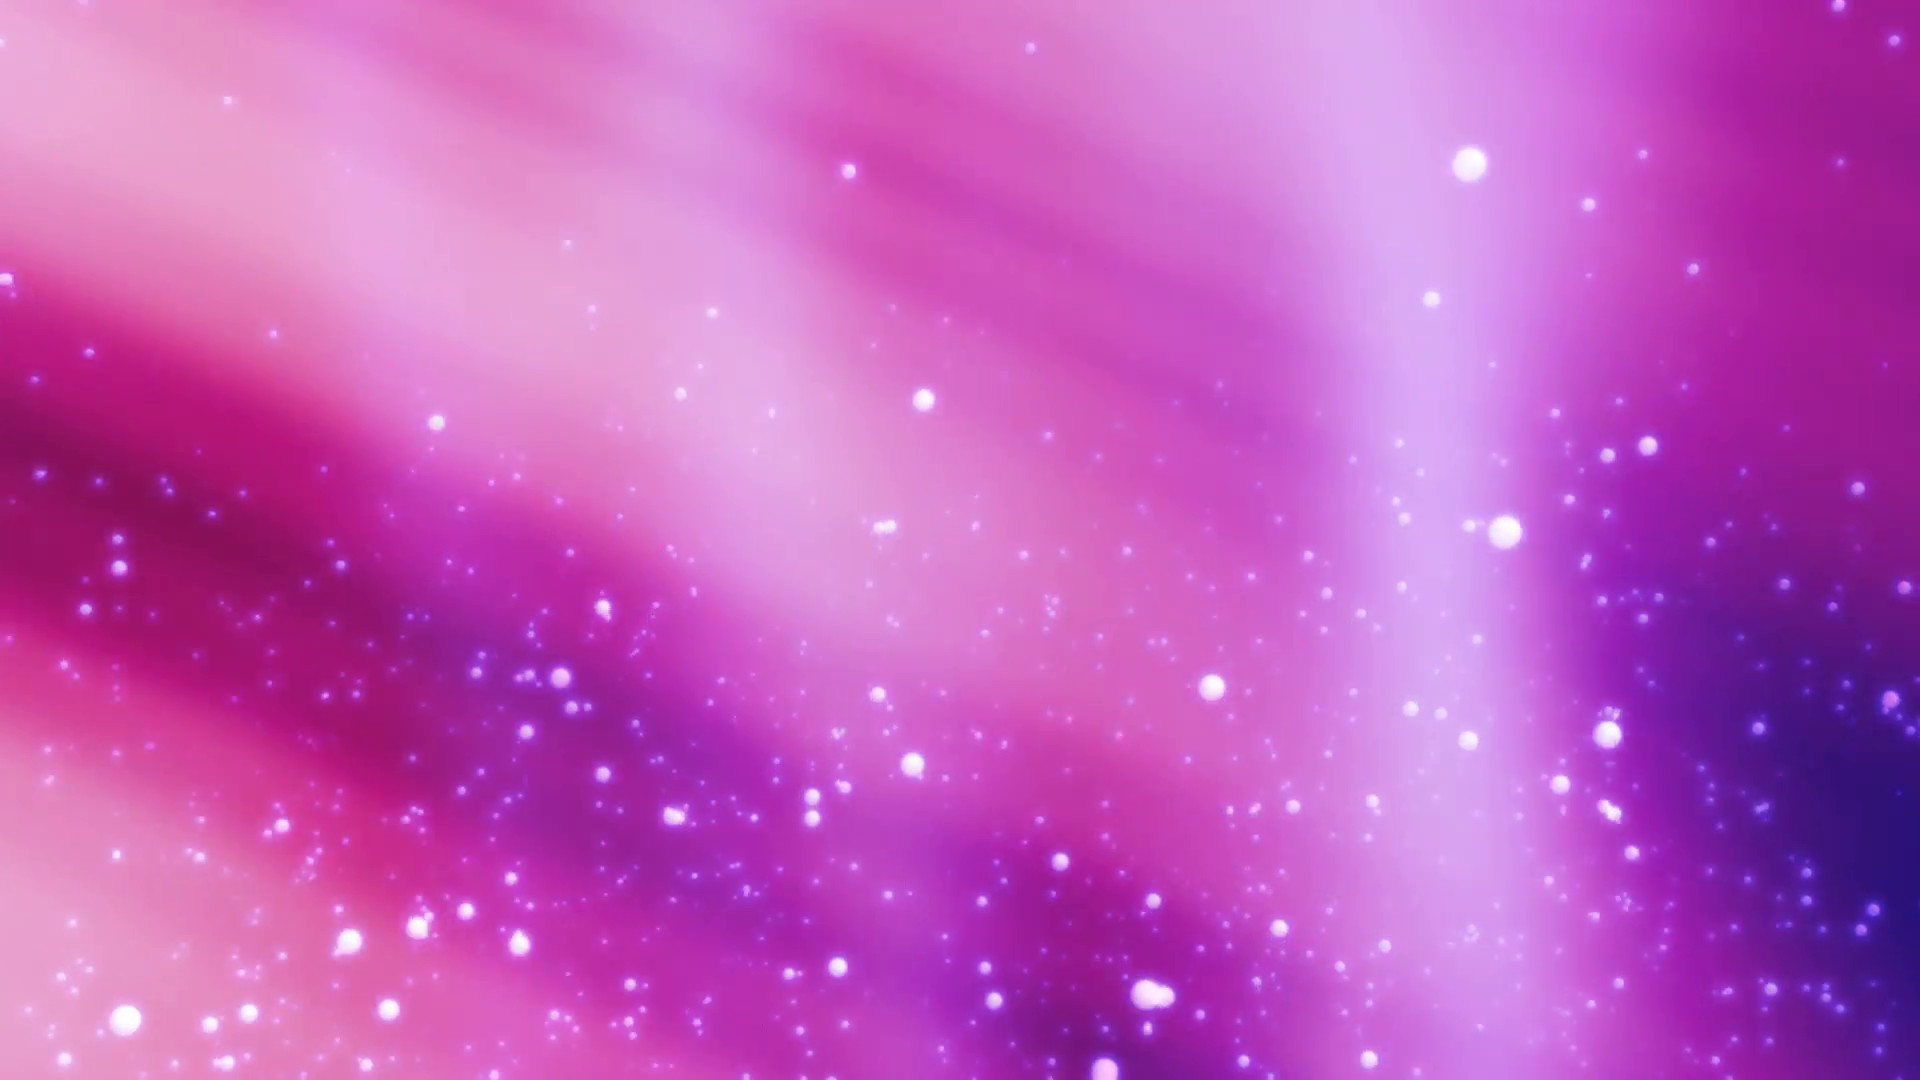 1920x1080  Subscription Library Pink and Purple Bubbles